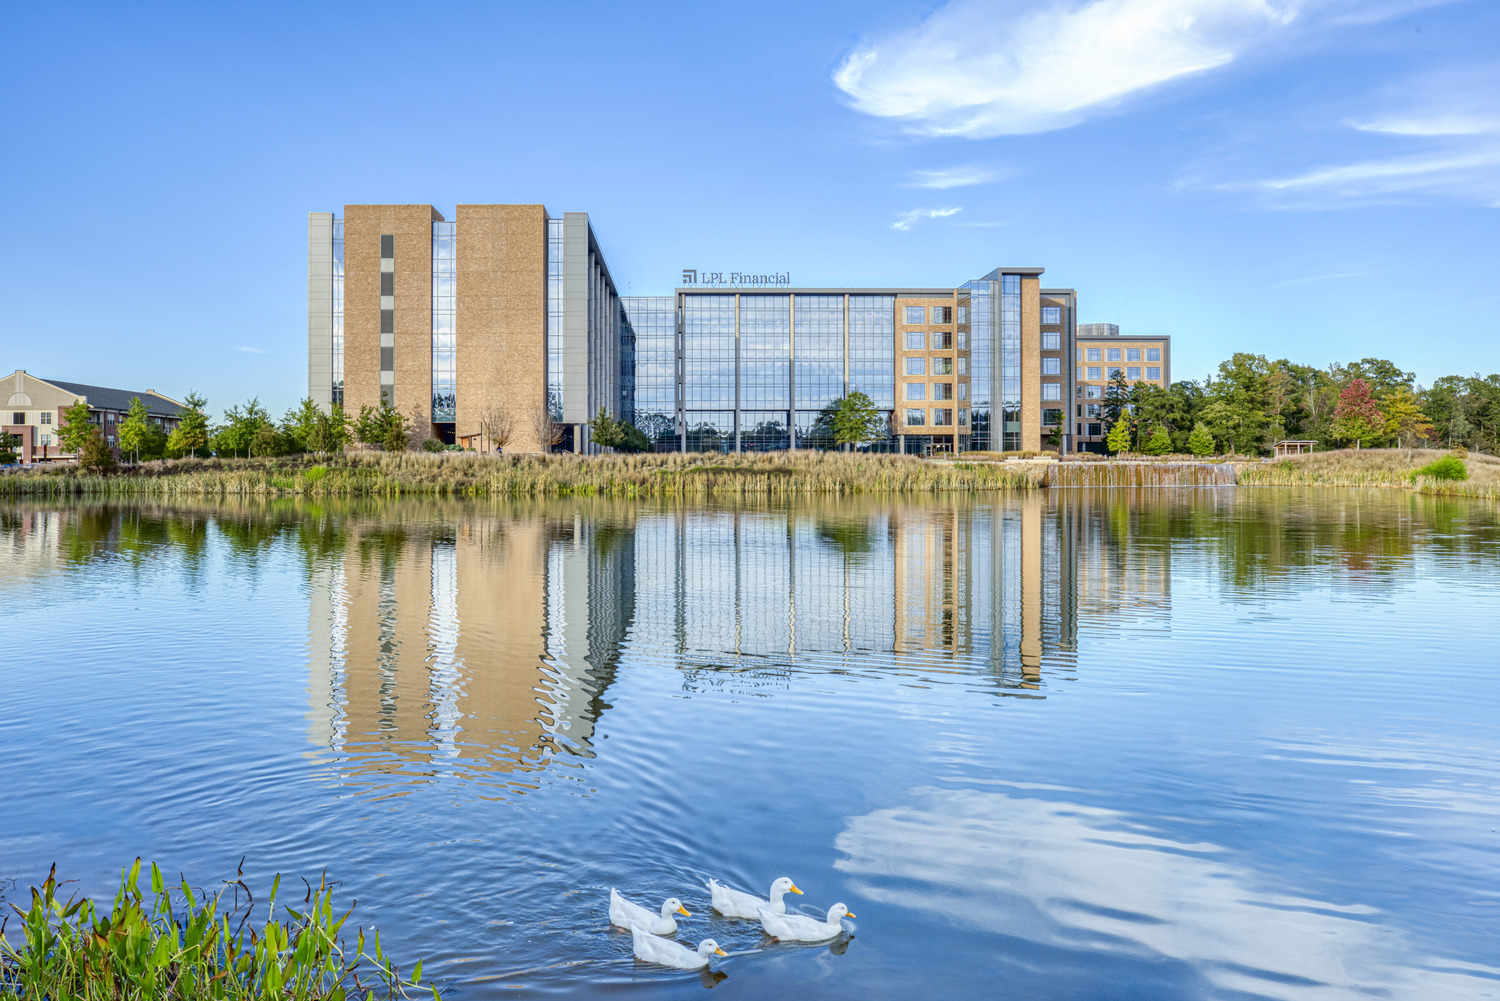 A corporate campus with 2 large office buildings in front of a lake